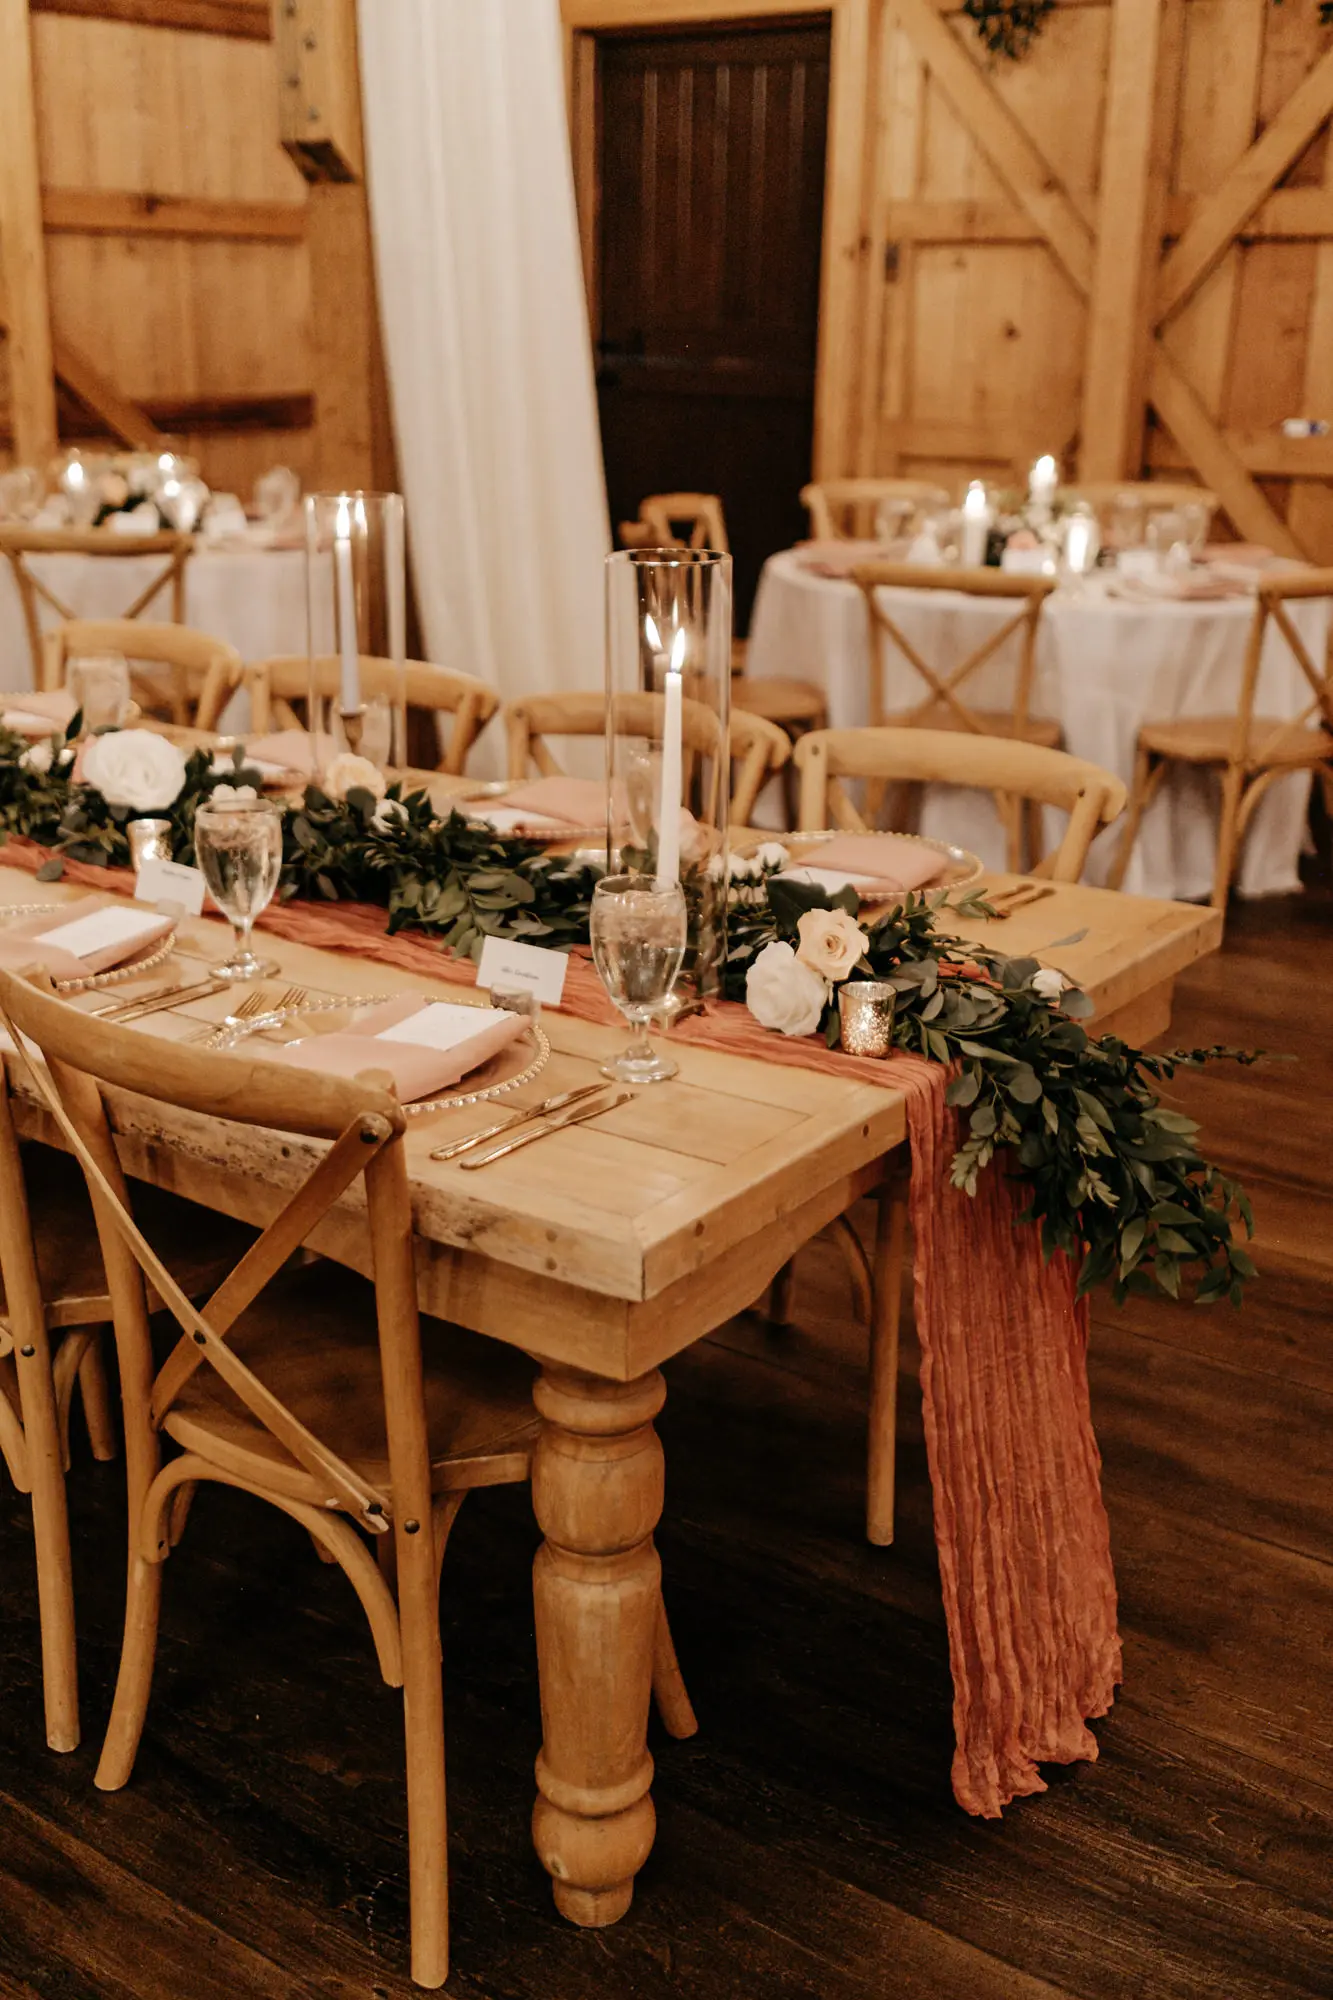 Rustic Garden Pink and Gold Barn Wedding Reception Tablescape Place Setting Long Feasting Table Decor Ideas | Greenery Garland with White Taper Candles Centerpiece Inspiration | Tampa Bay Florist Monarch Events